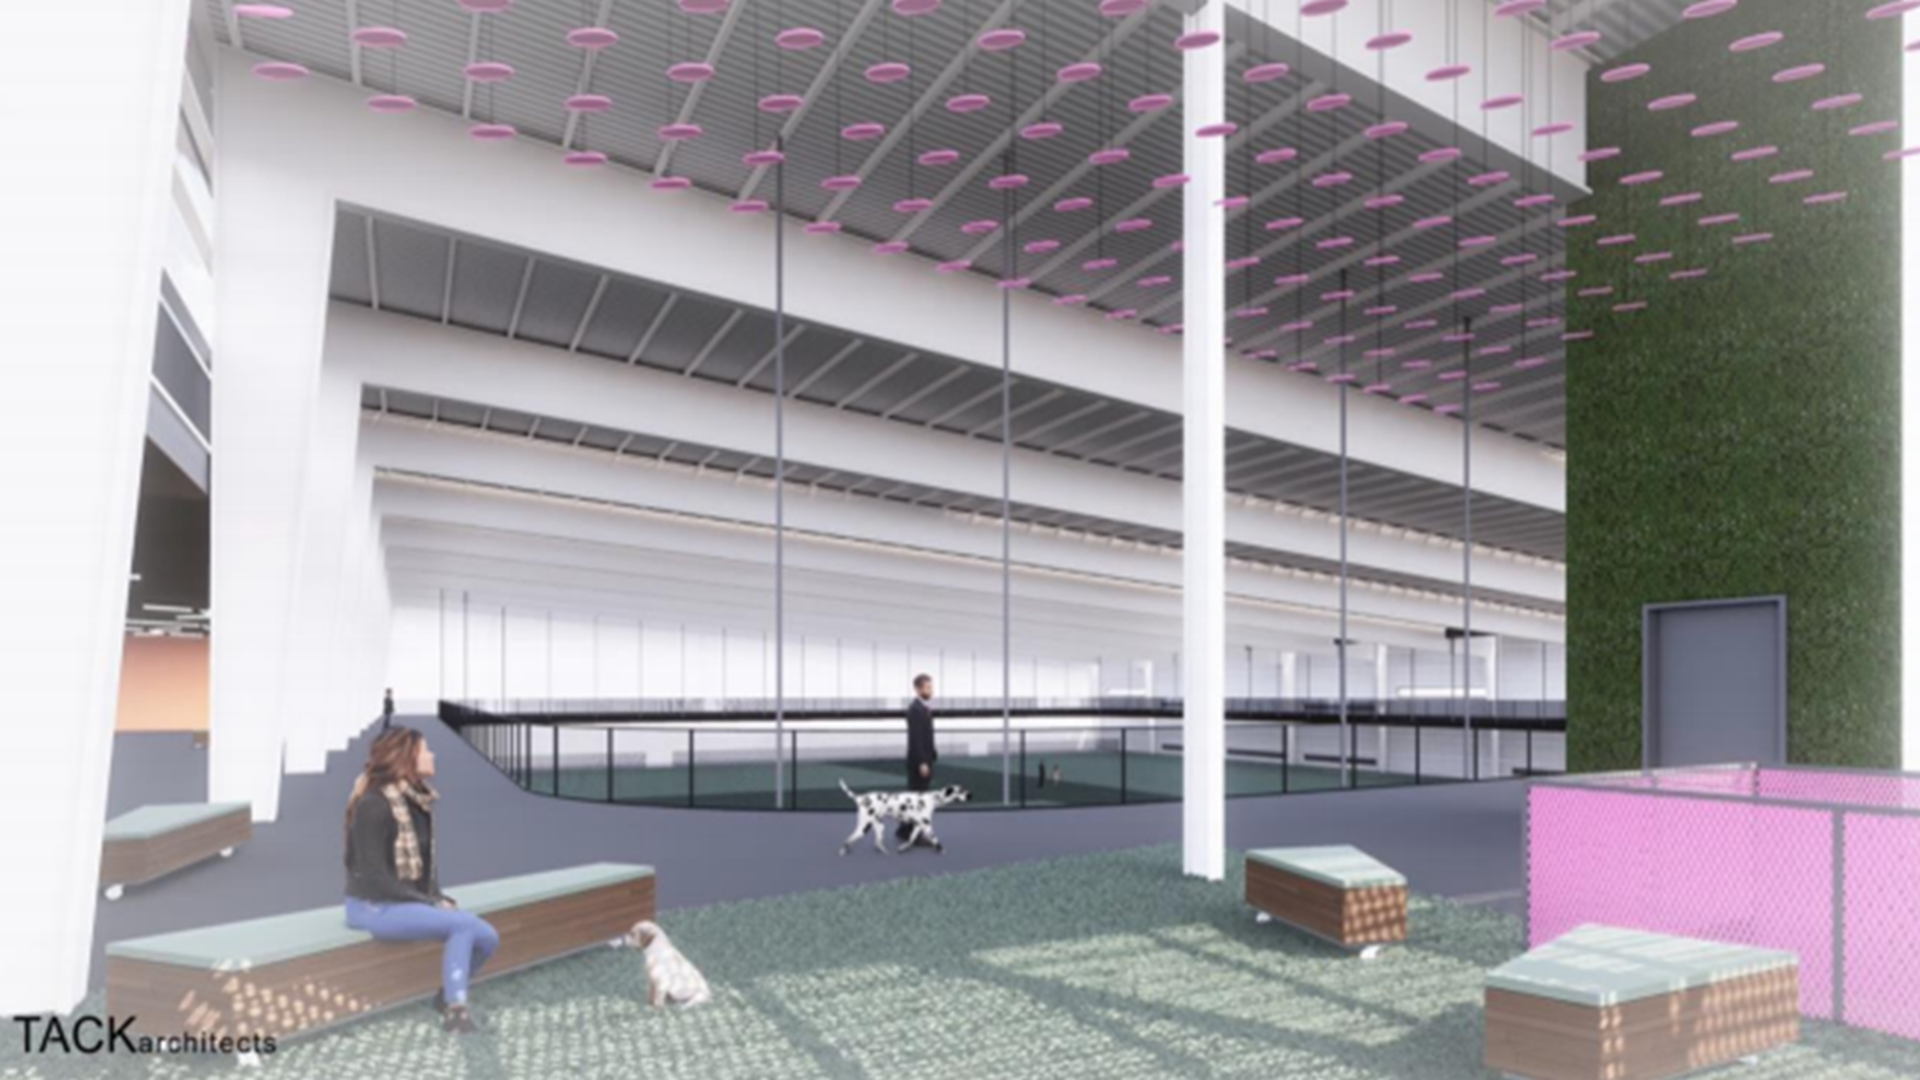 The park will feature an indoor dog park, coffee shop, a dog walking track and more.